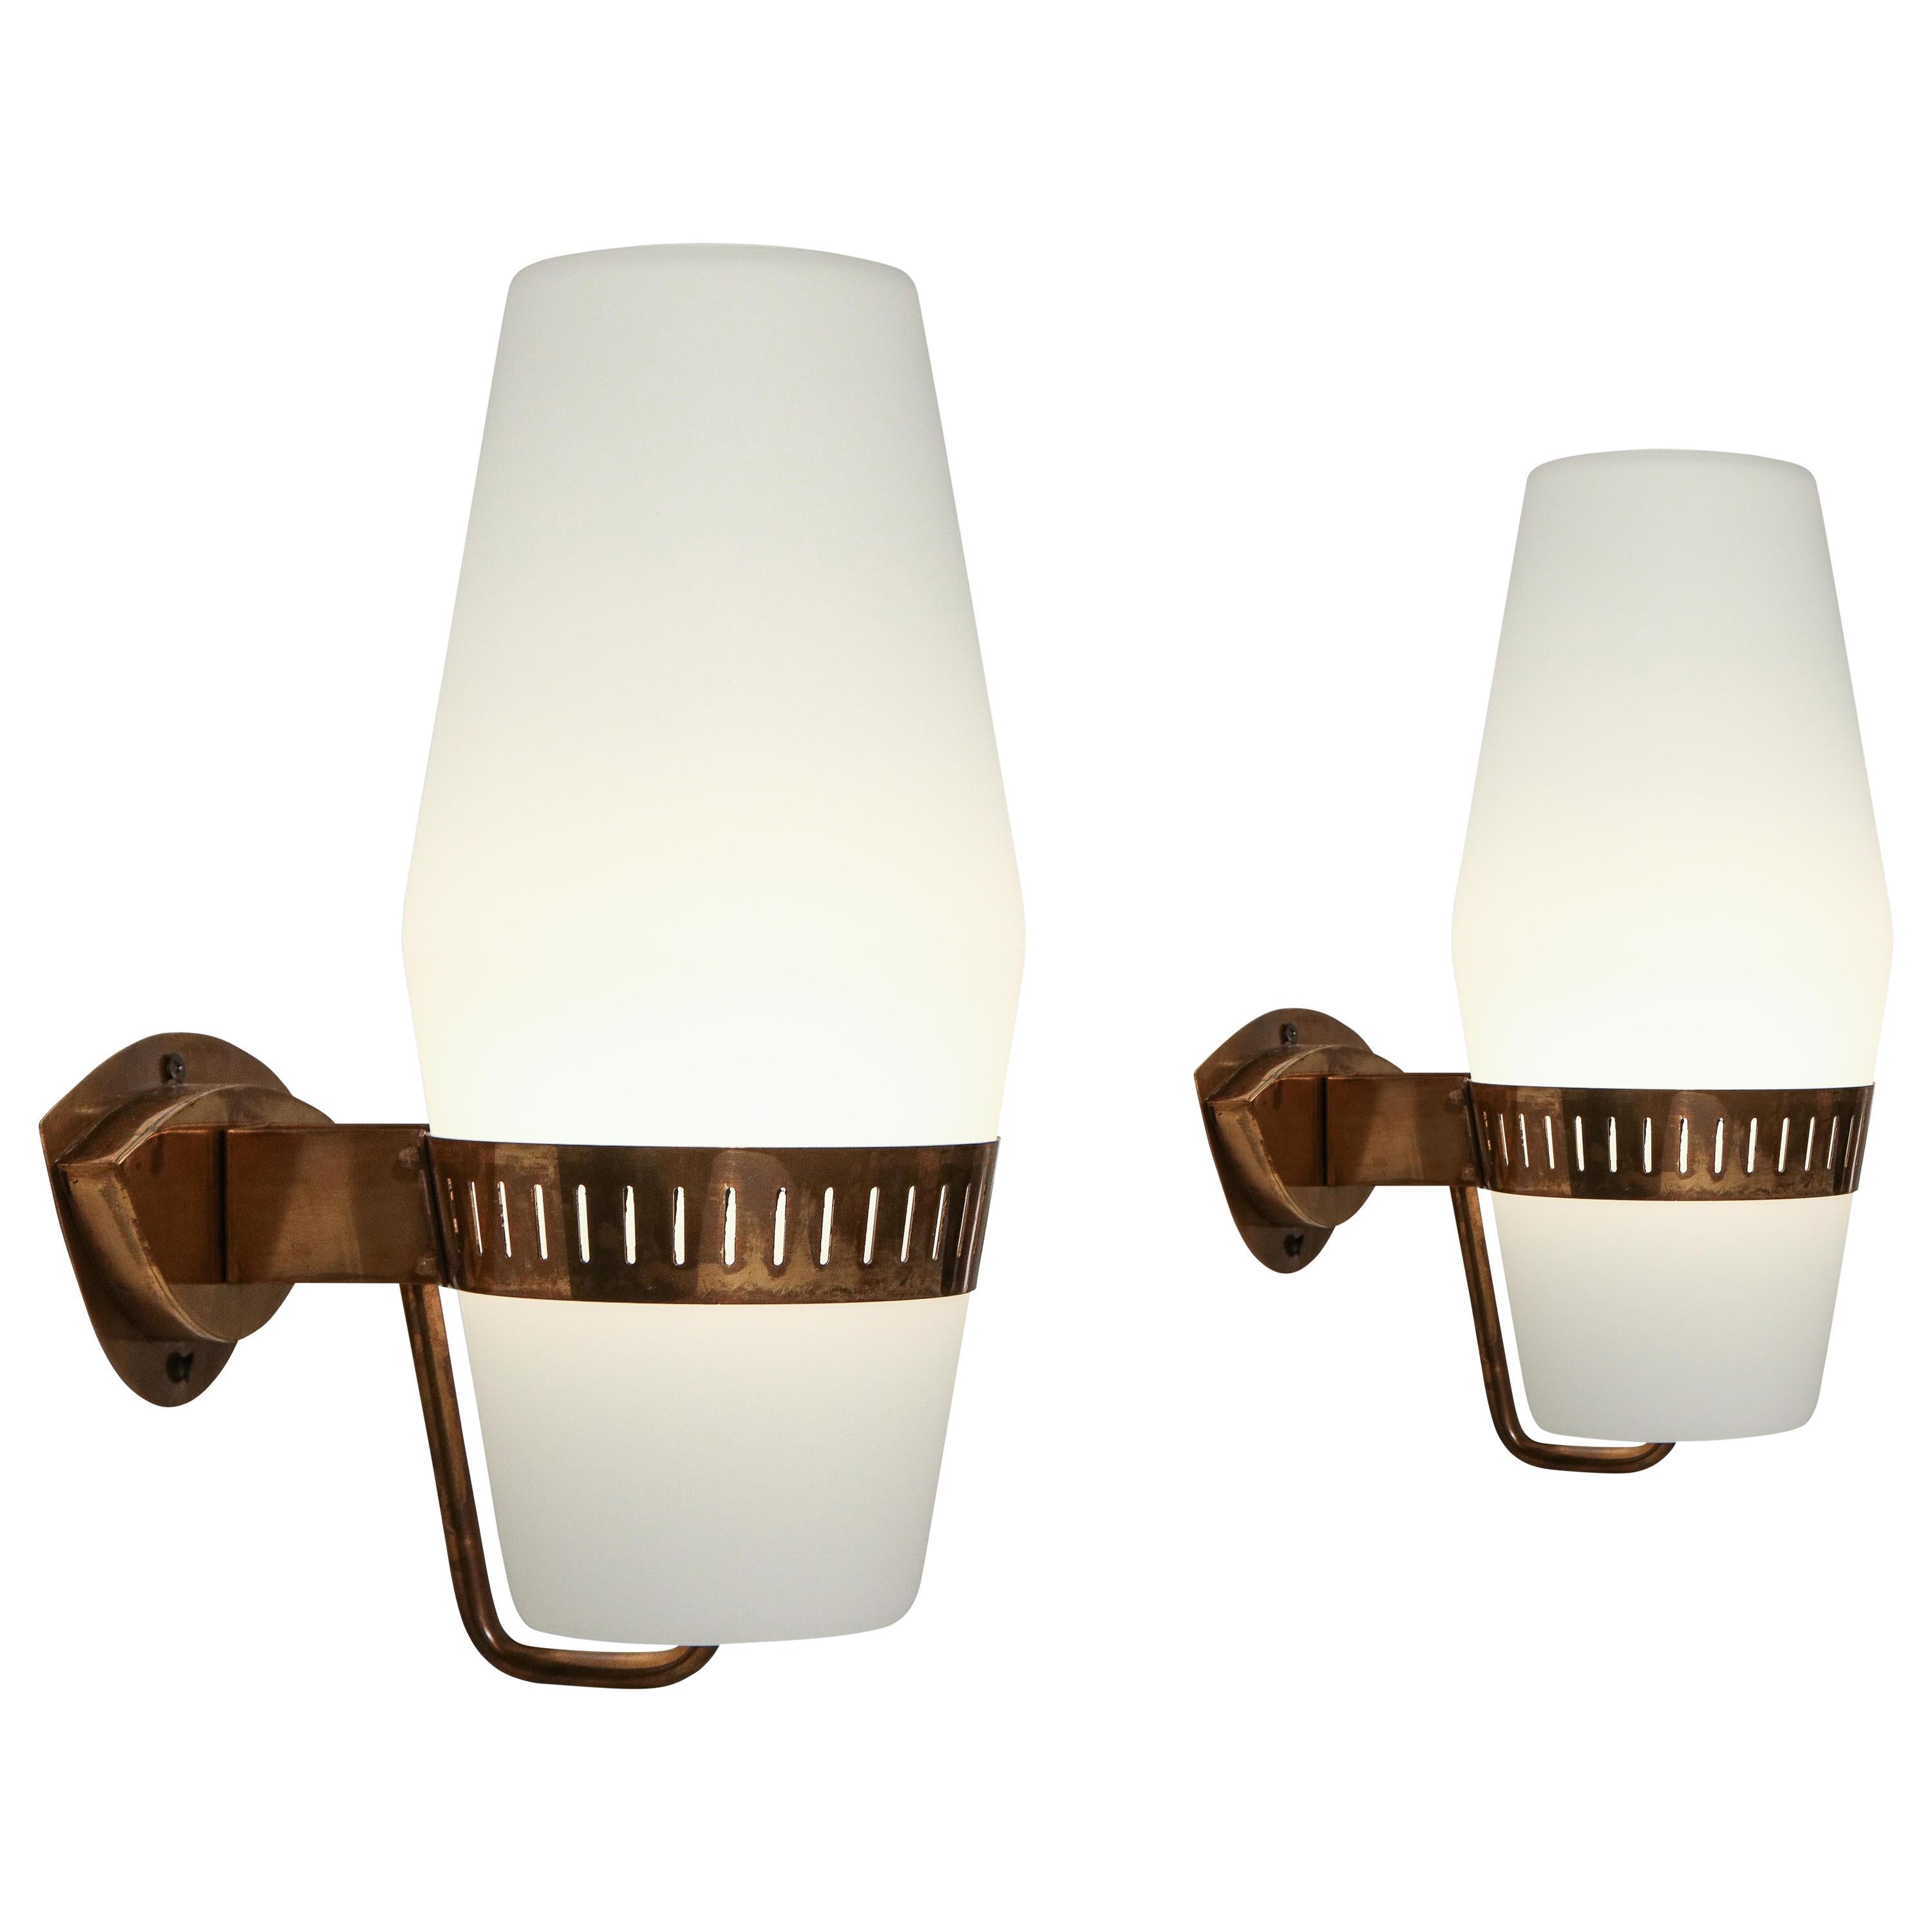 Stilnovo set of four or pairs of elegant sconces model 2078 with large frosted glass lantern-shaped shades held by brass brackets. Recently rewired to U.S. standards with custom shaped backplates to fit original backplates in keeping with its